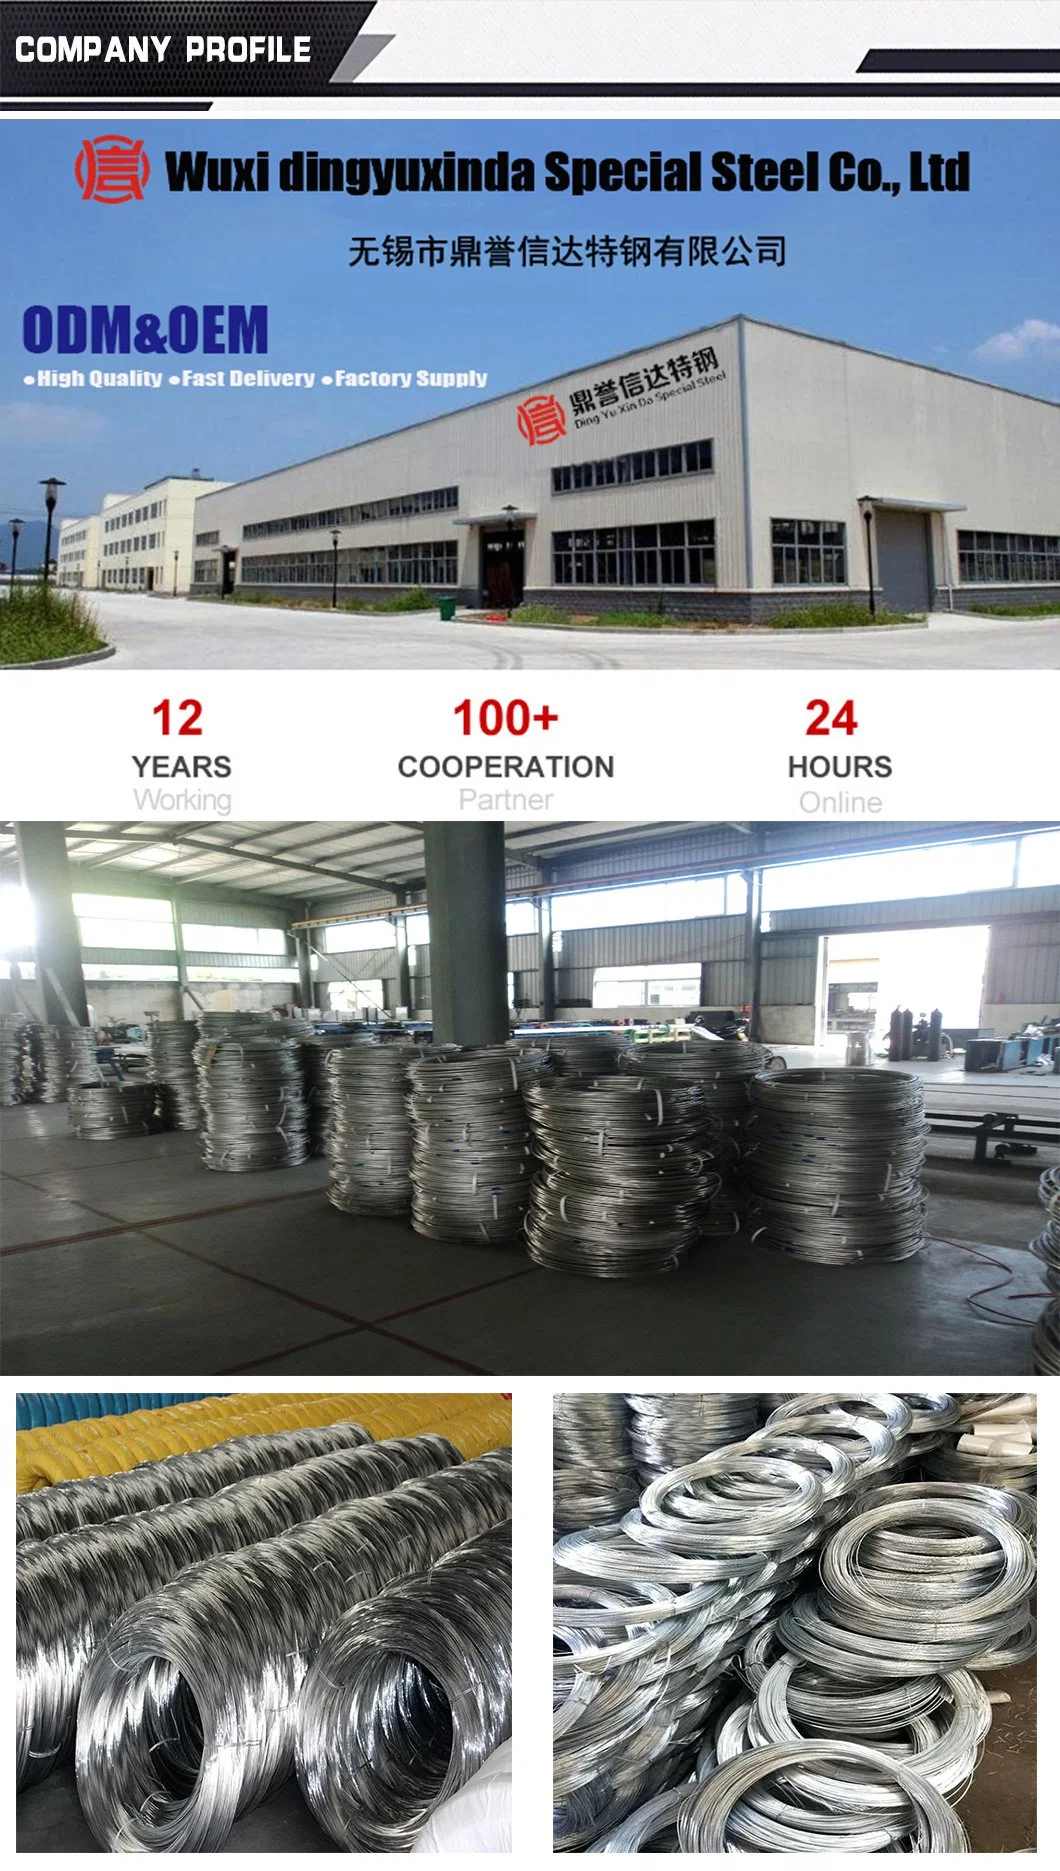 Binding Wire Swg 12 14 Hot Dipped Galvanized Iron Steel Metal Wire Rope Carbon Electro Electric Stainless Steel Wire Meshot DIP Galvanized Steel Wires